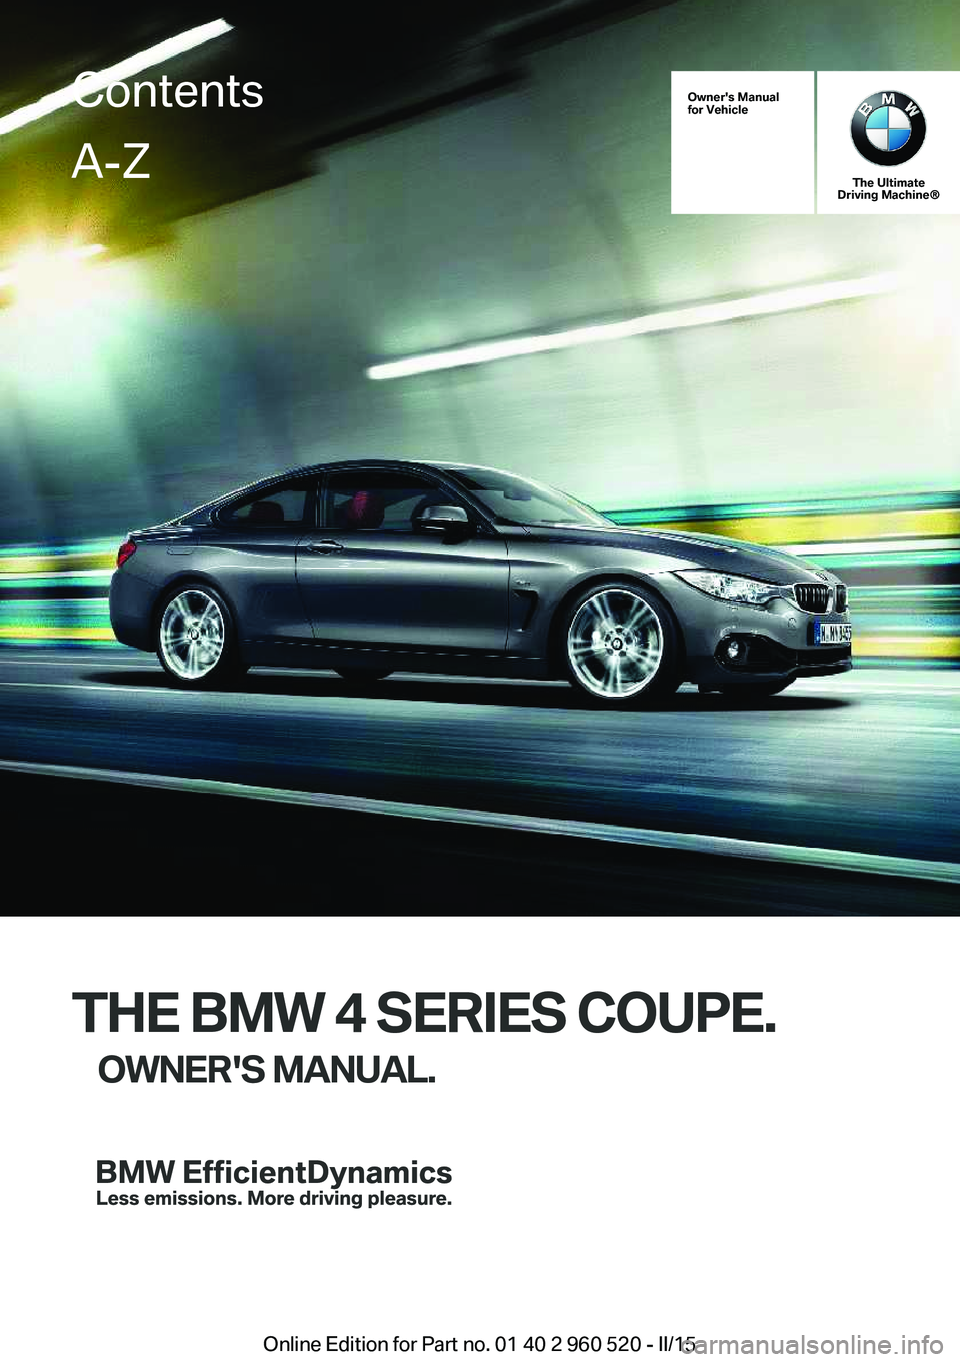 BMW 428 COUPE 2016  Owners Manual Owner's Manual
for Vehicle
The Ultimate
Driving Machine®
THE BMW 4 SERIES COUPE.
OWNER'S MANUAL.
ContentsA-Z
Online Edition for Part no. 01 40 2 960 520 - II/15   